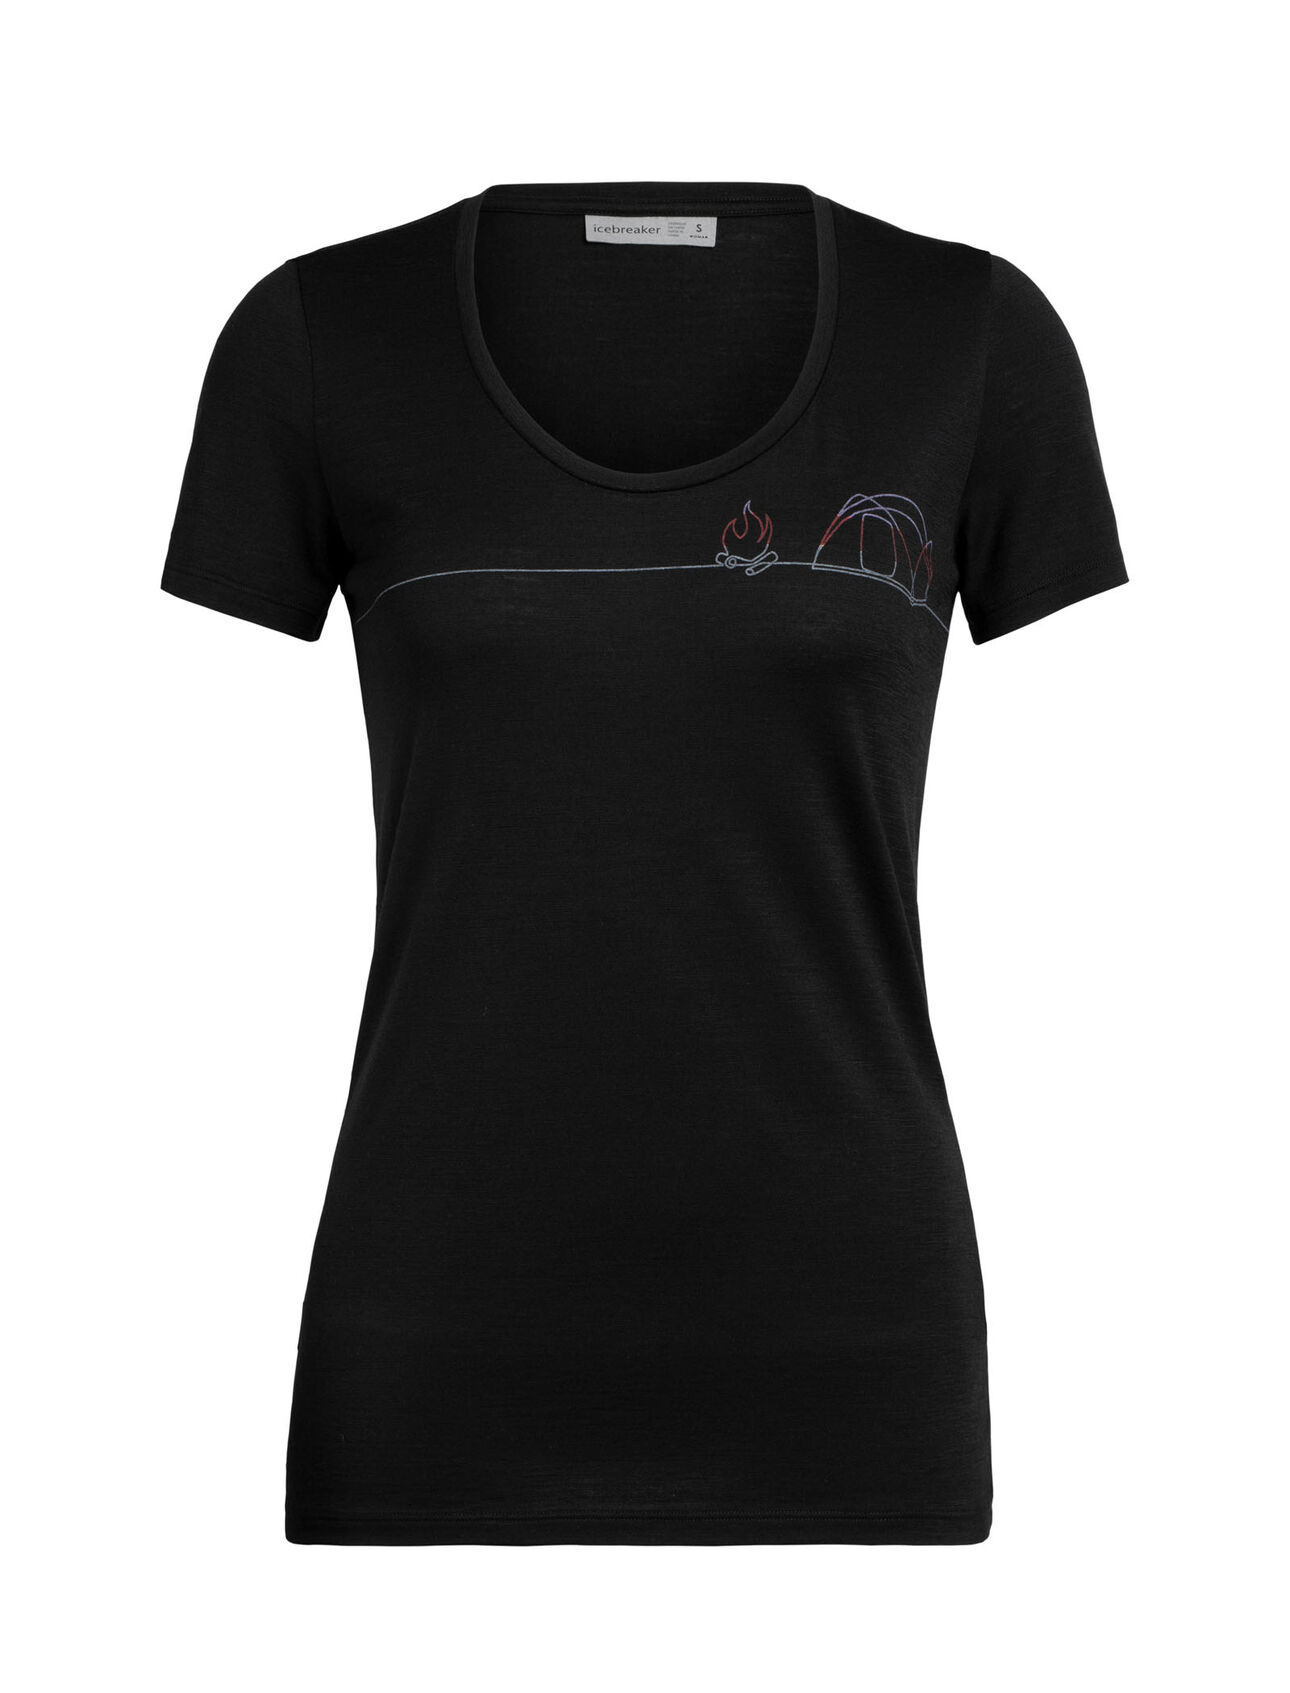 Womens Merino Tech Lite Short Sleeve Scoop Neck T-Shirt Single Line Camp A feminine take on our classic Tech Lite T-shirt in soft and breathable merino. Artist Zachary Snyder captures the joy of camping and the outdoors in a single-line drawing.